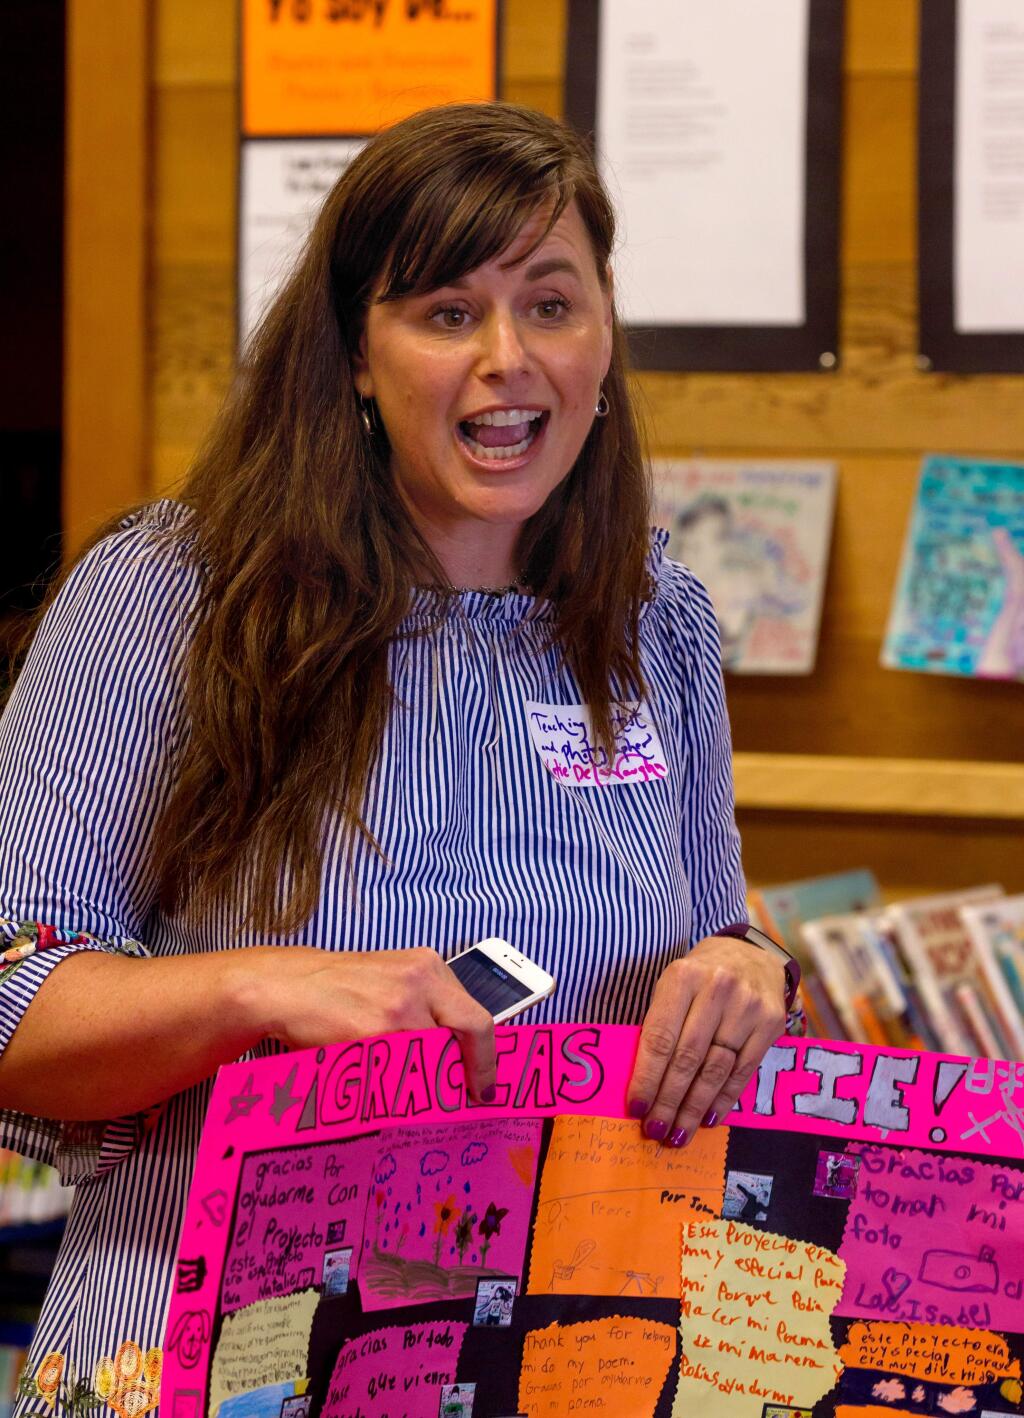 Katie Dela Vaughn, a teaching artist, holds a gift saying 'Gracias Katie' that she received from the the second graders from Loma Vista Immersion Academy at Petaluma Regional Library, in Petaluma, Calif., on Wednesday, May 9, 2018. (Photo by Darryl Bush / For The Press Democrat)